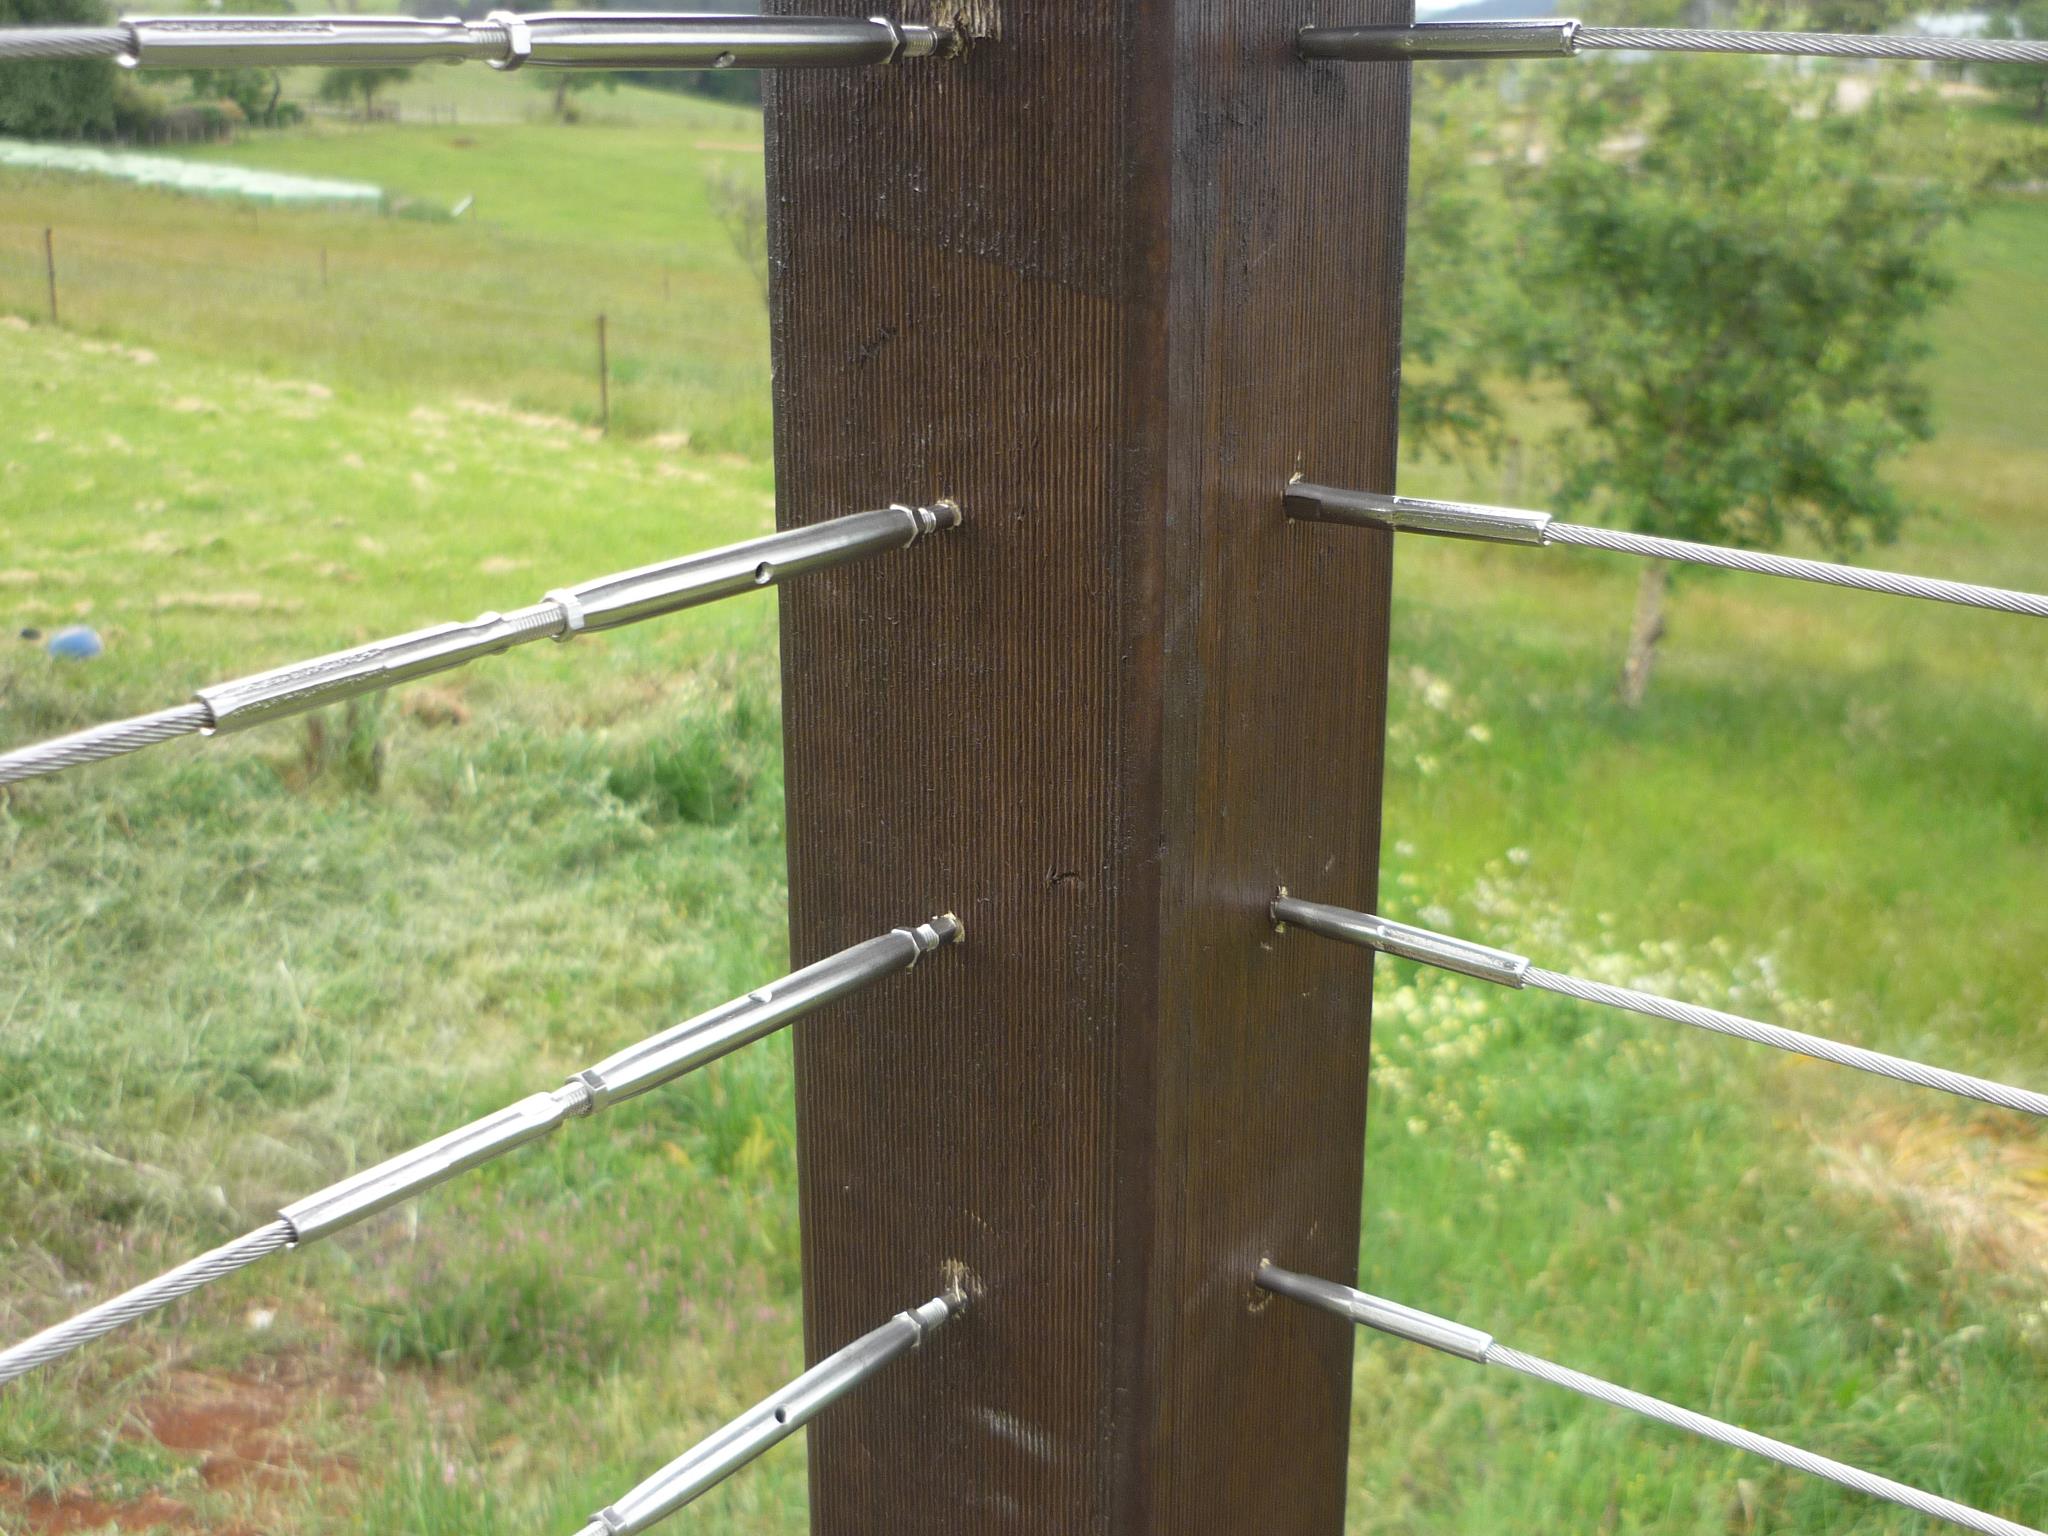 http://www.shanesstainless.com.au/images/detailed/4/Preswaged_rigging_turnbuckle_&_lag_screw_on_timber_post..jpg